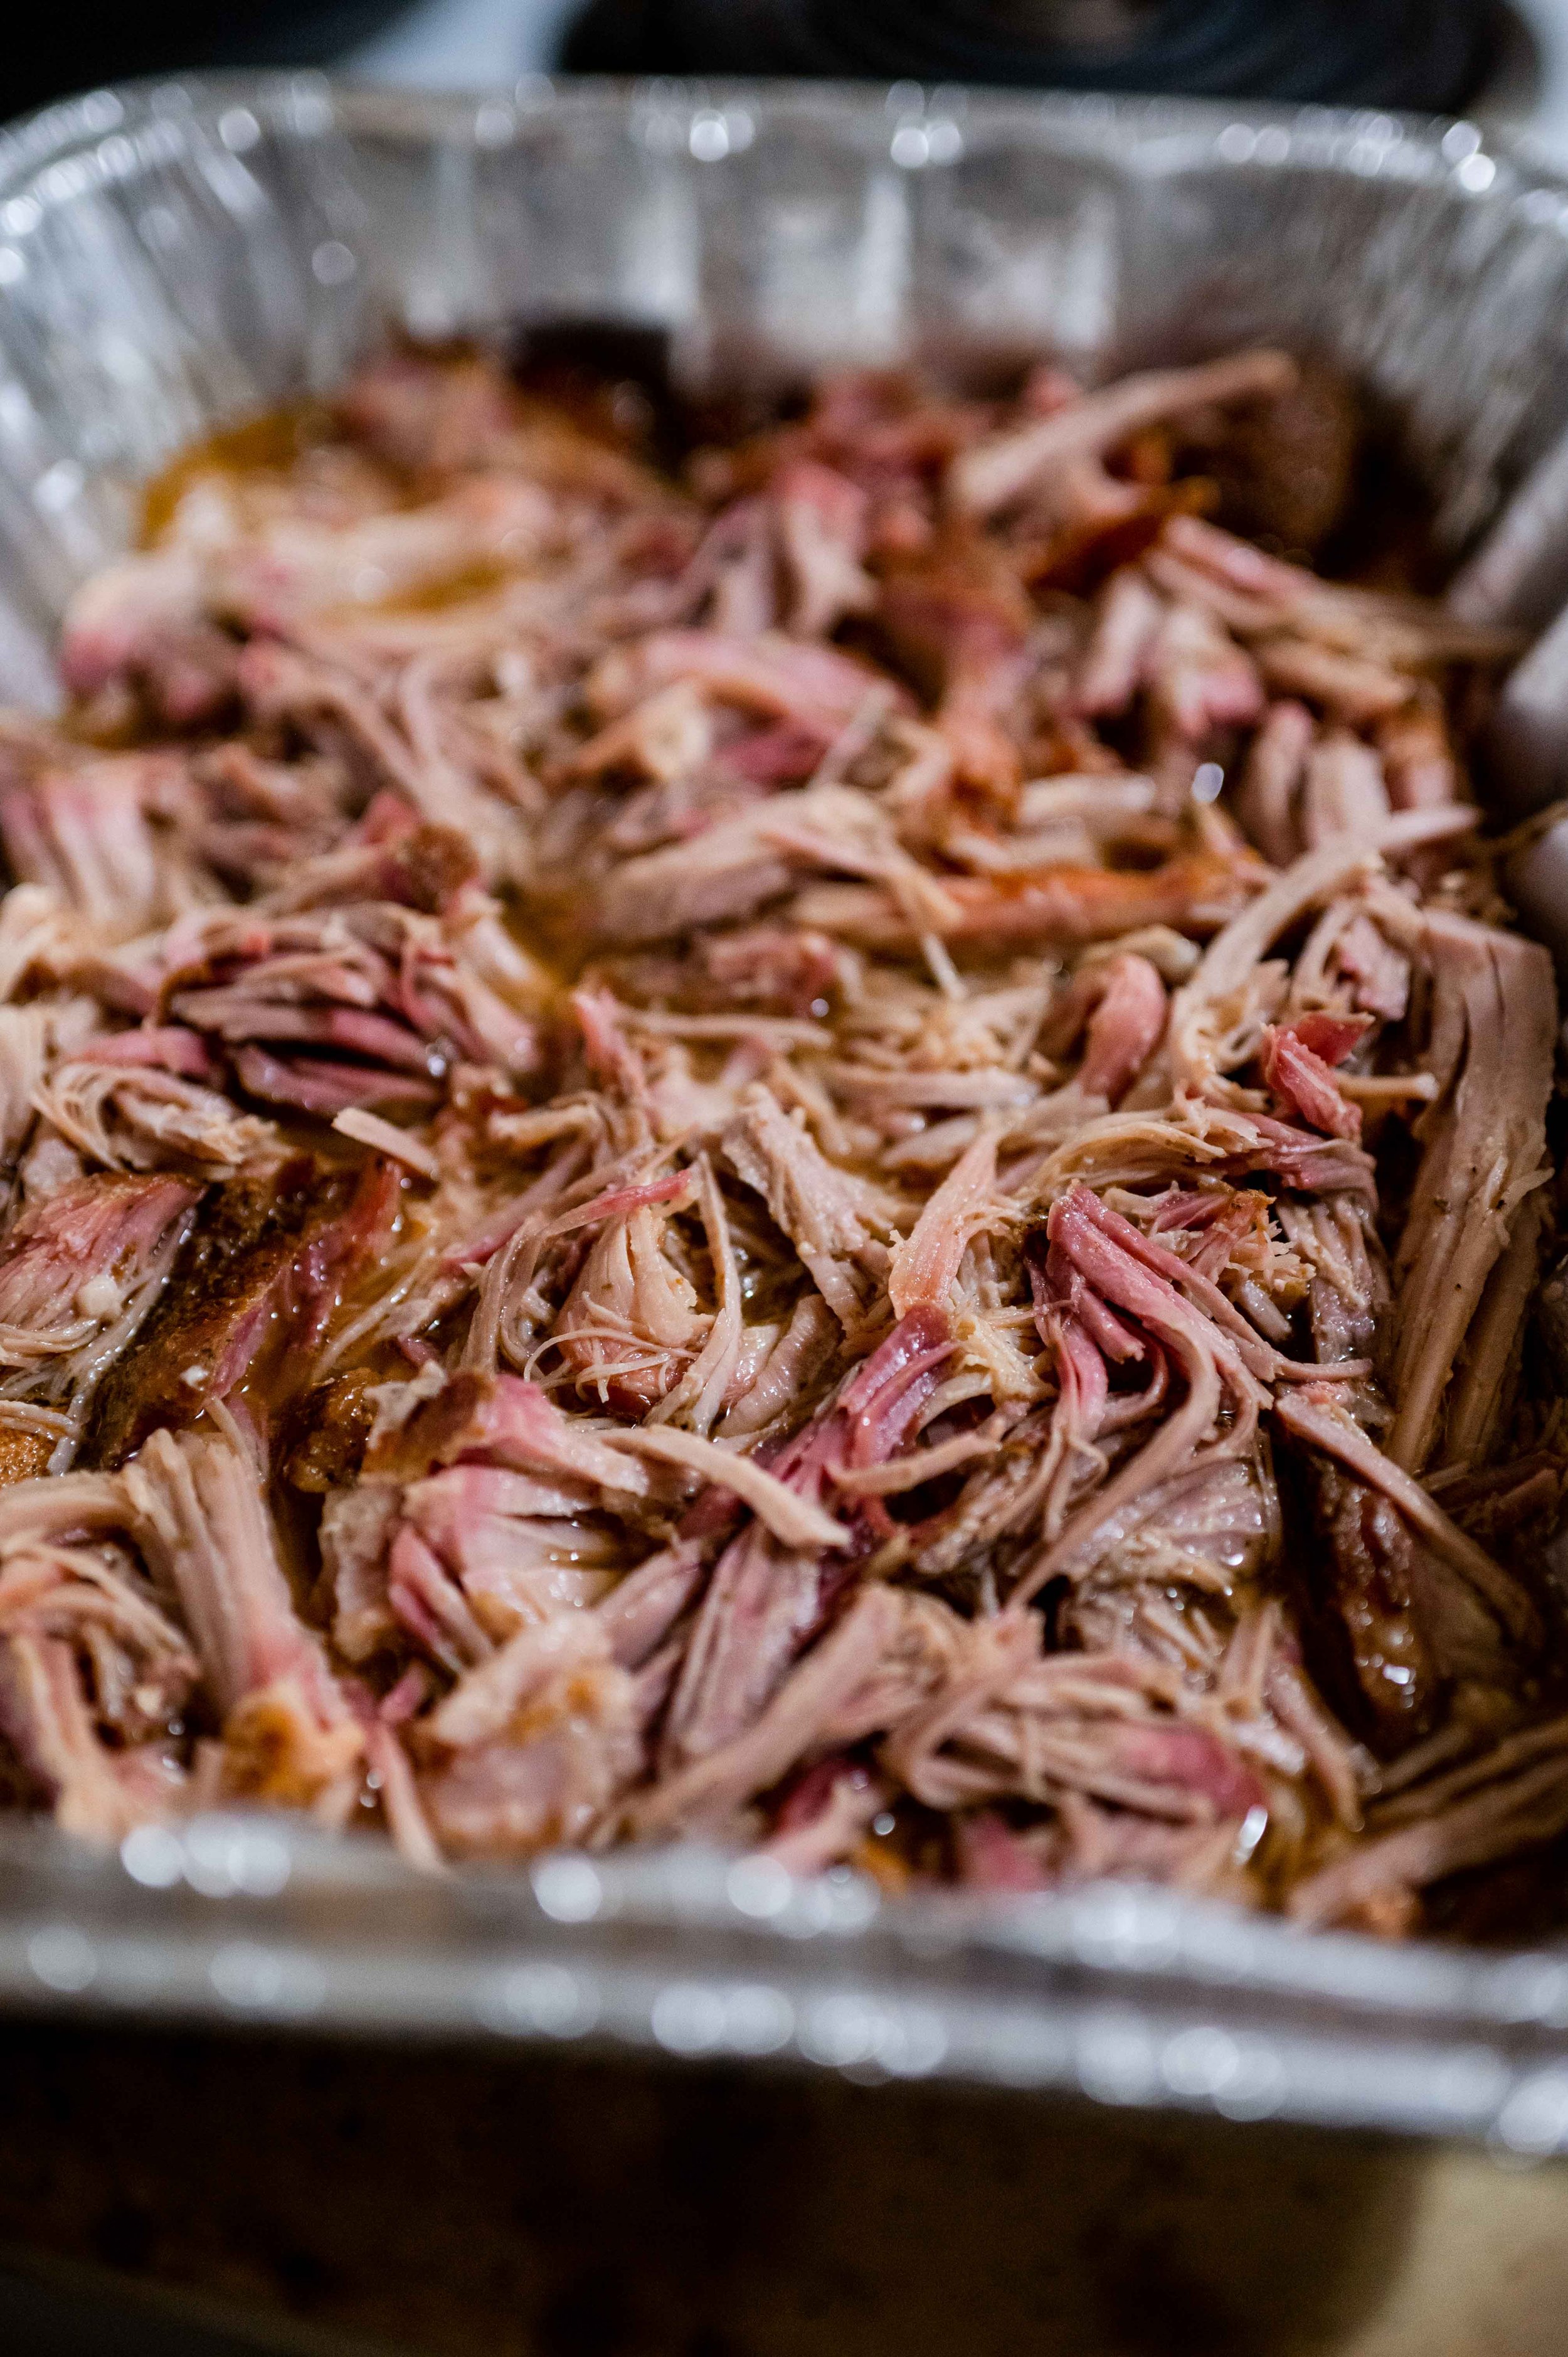 Texas Style Smoked Pulled Pork Recipe - Traeger Pulled Pork - Summer BBQ Pulled Pork Recipe - Smoked Pulled Pork Slider Sandwiches - Meals for Families - BBQ for a Crowd